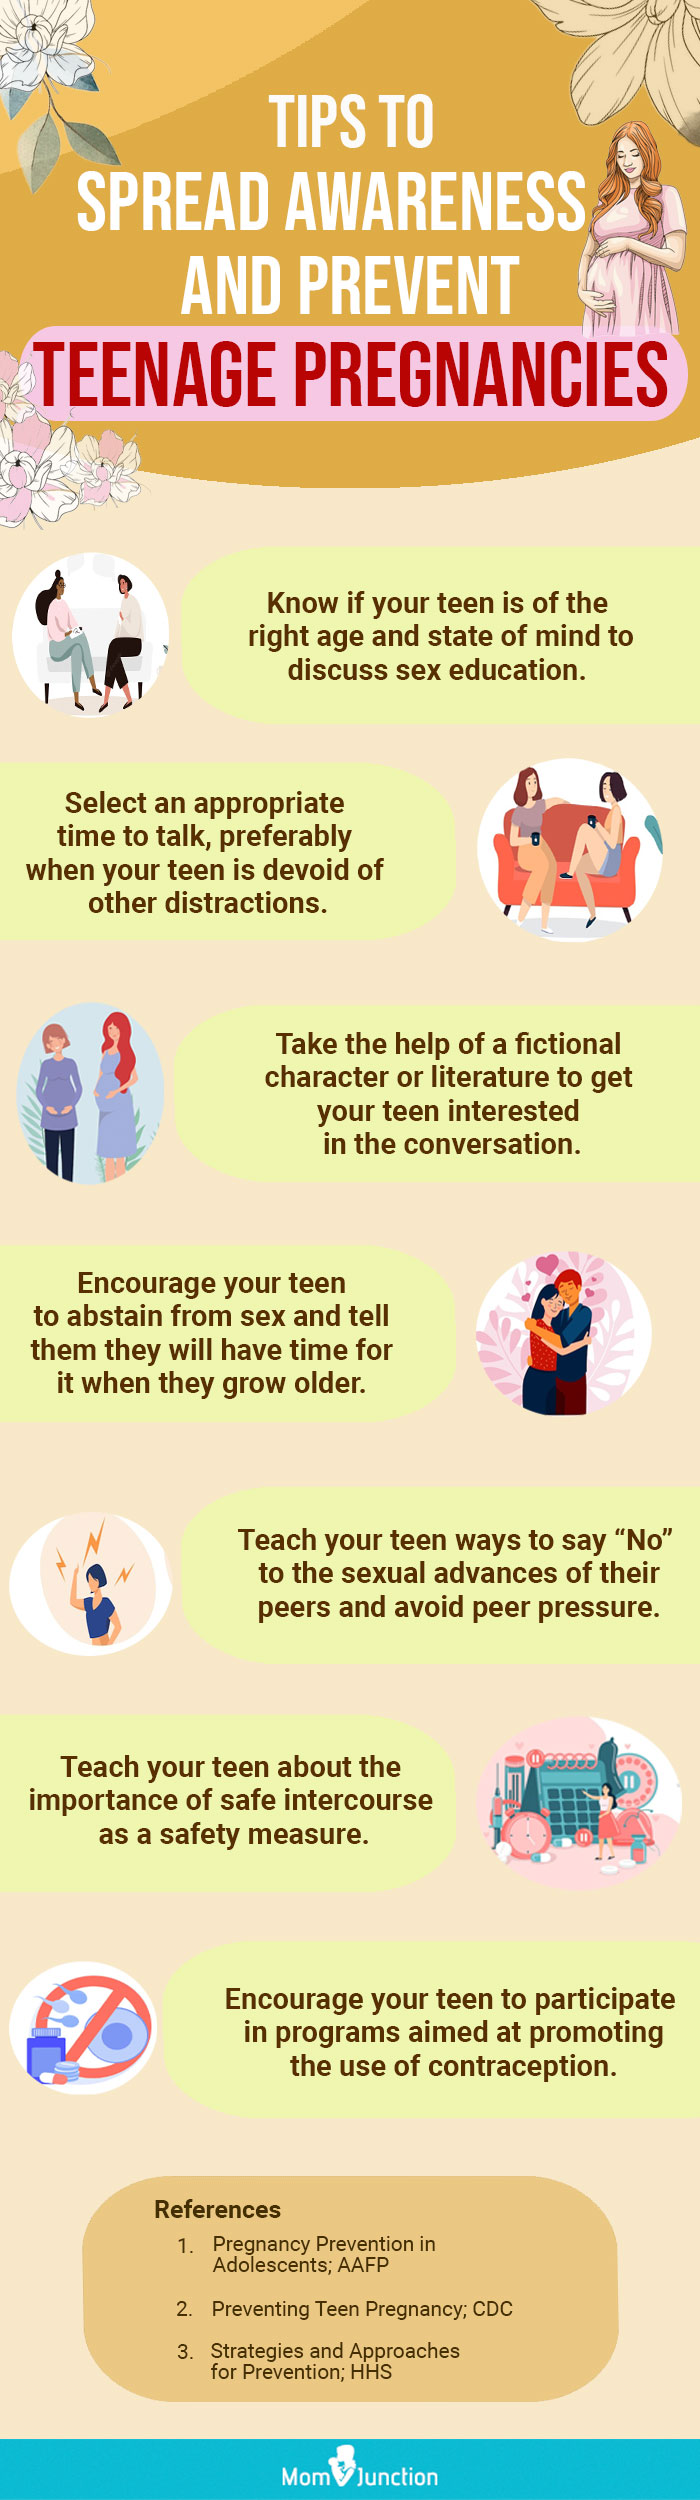 tips to spread awareness and prevent teenage pregnancies (infographic)